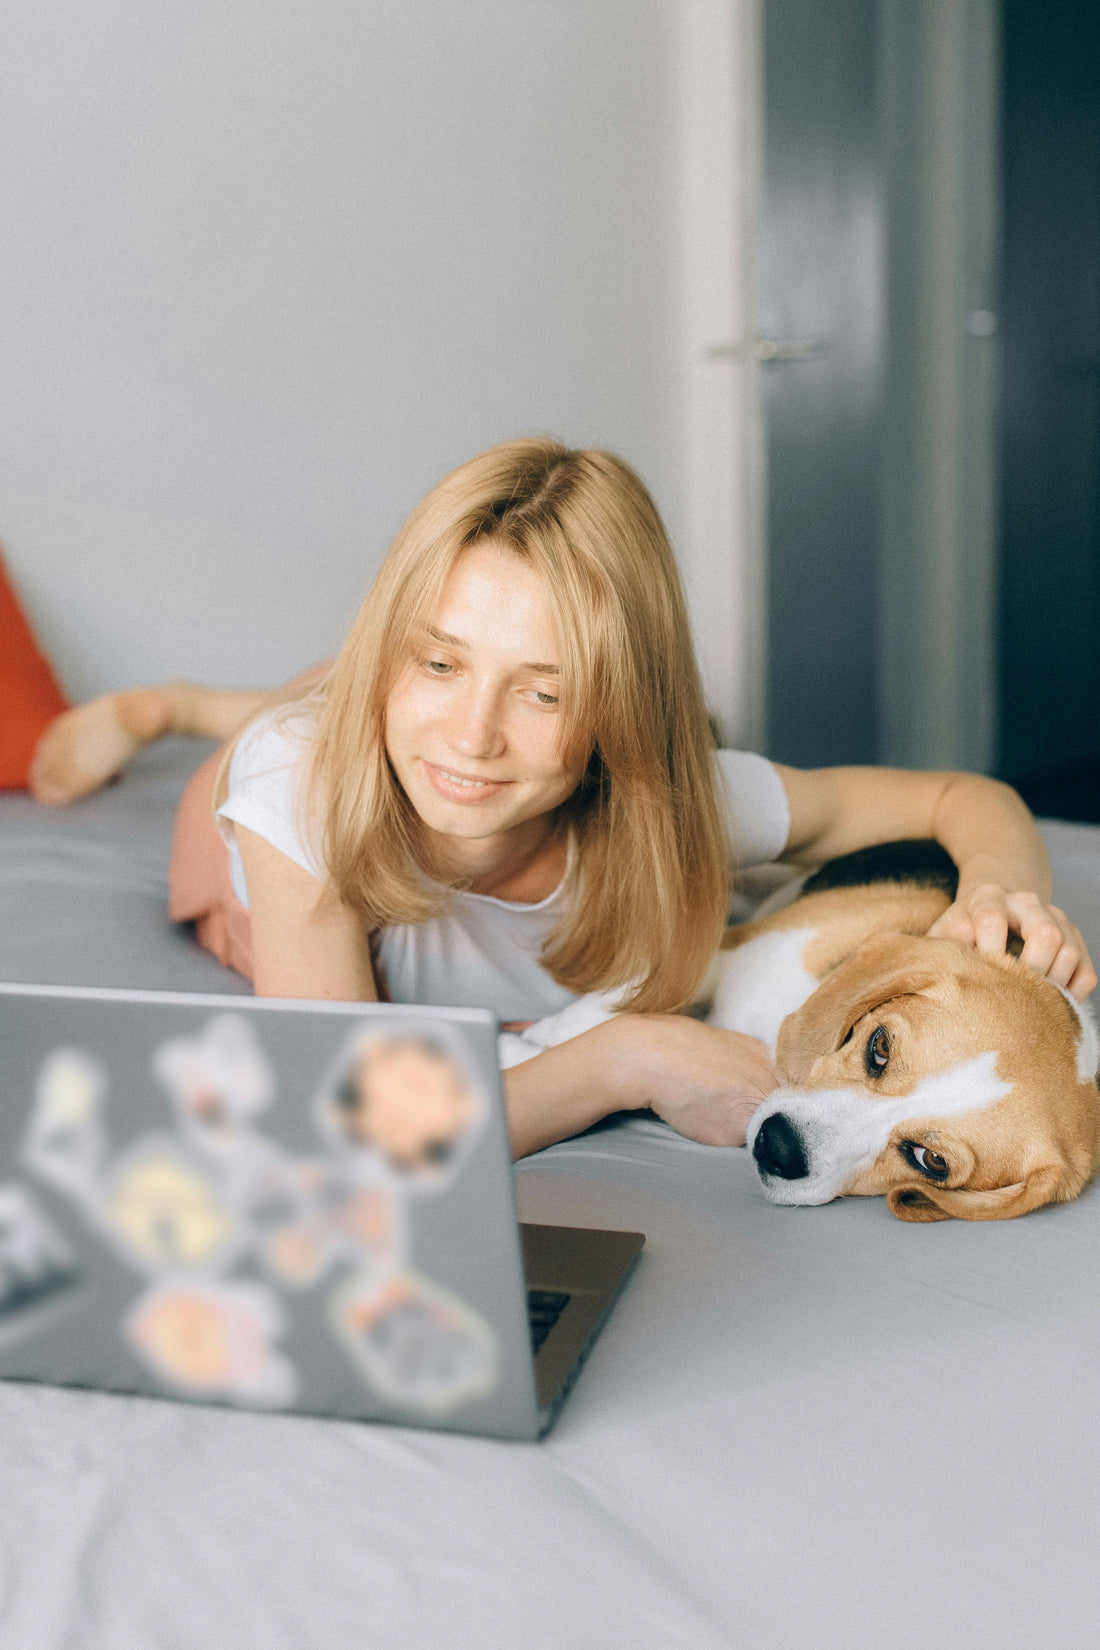 The Pawsitive Obsession: Why So Many Millennials Are Crazy About Dogs